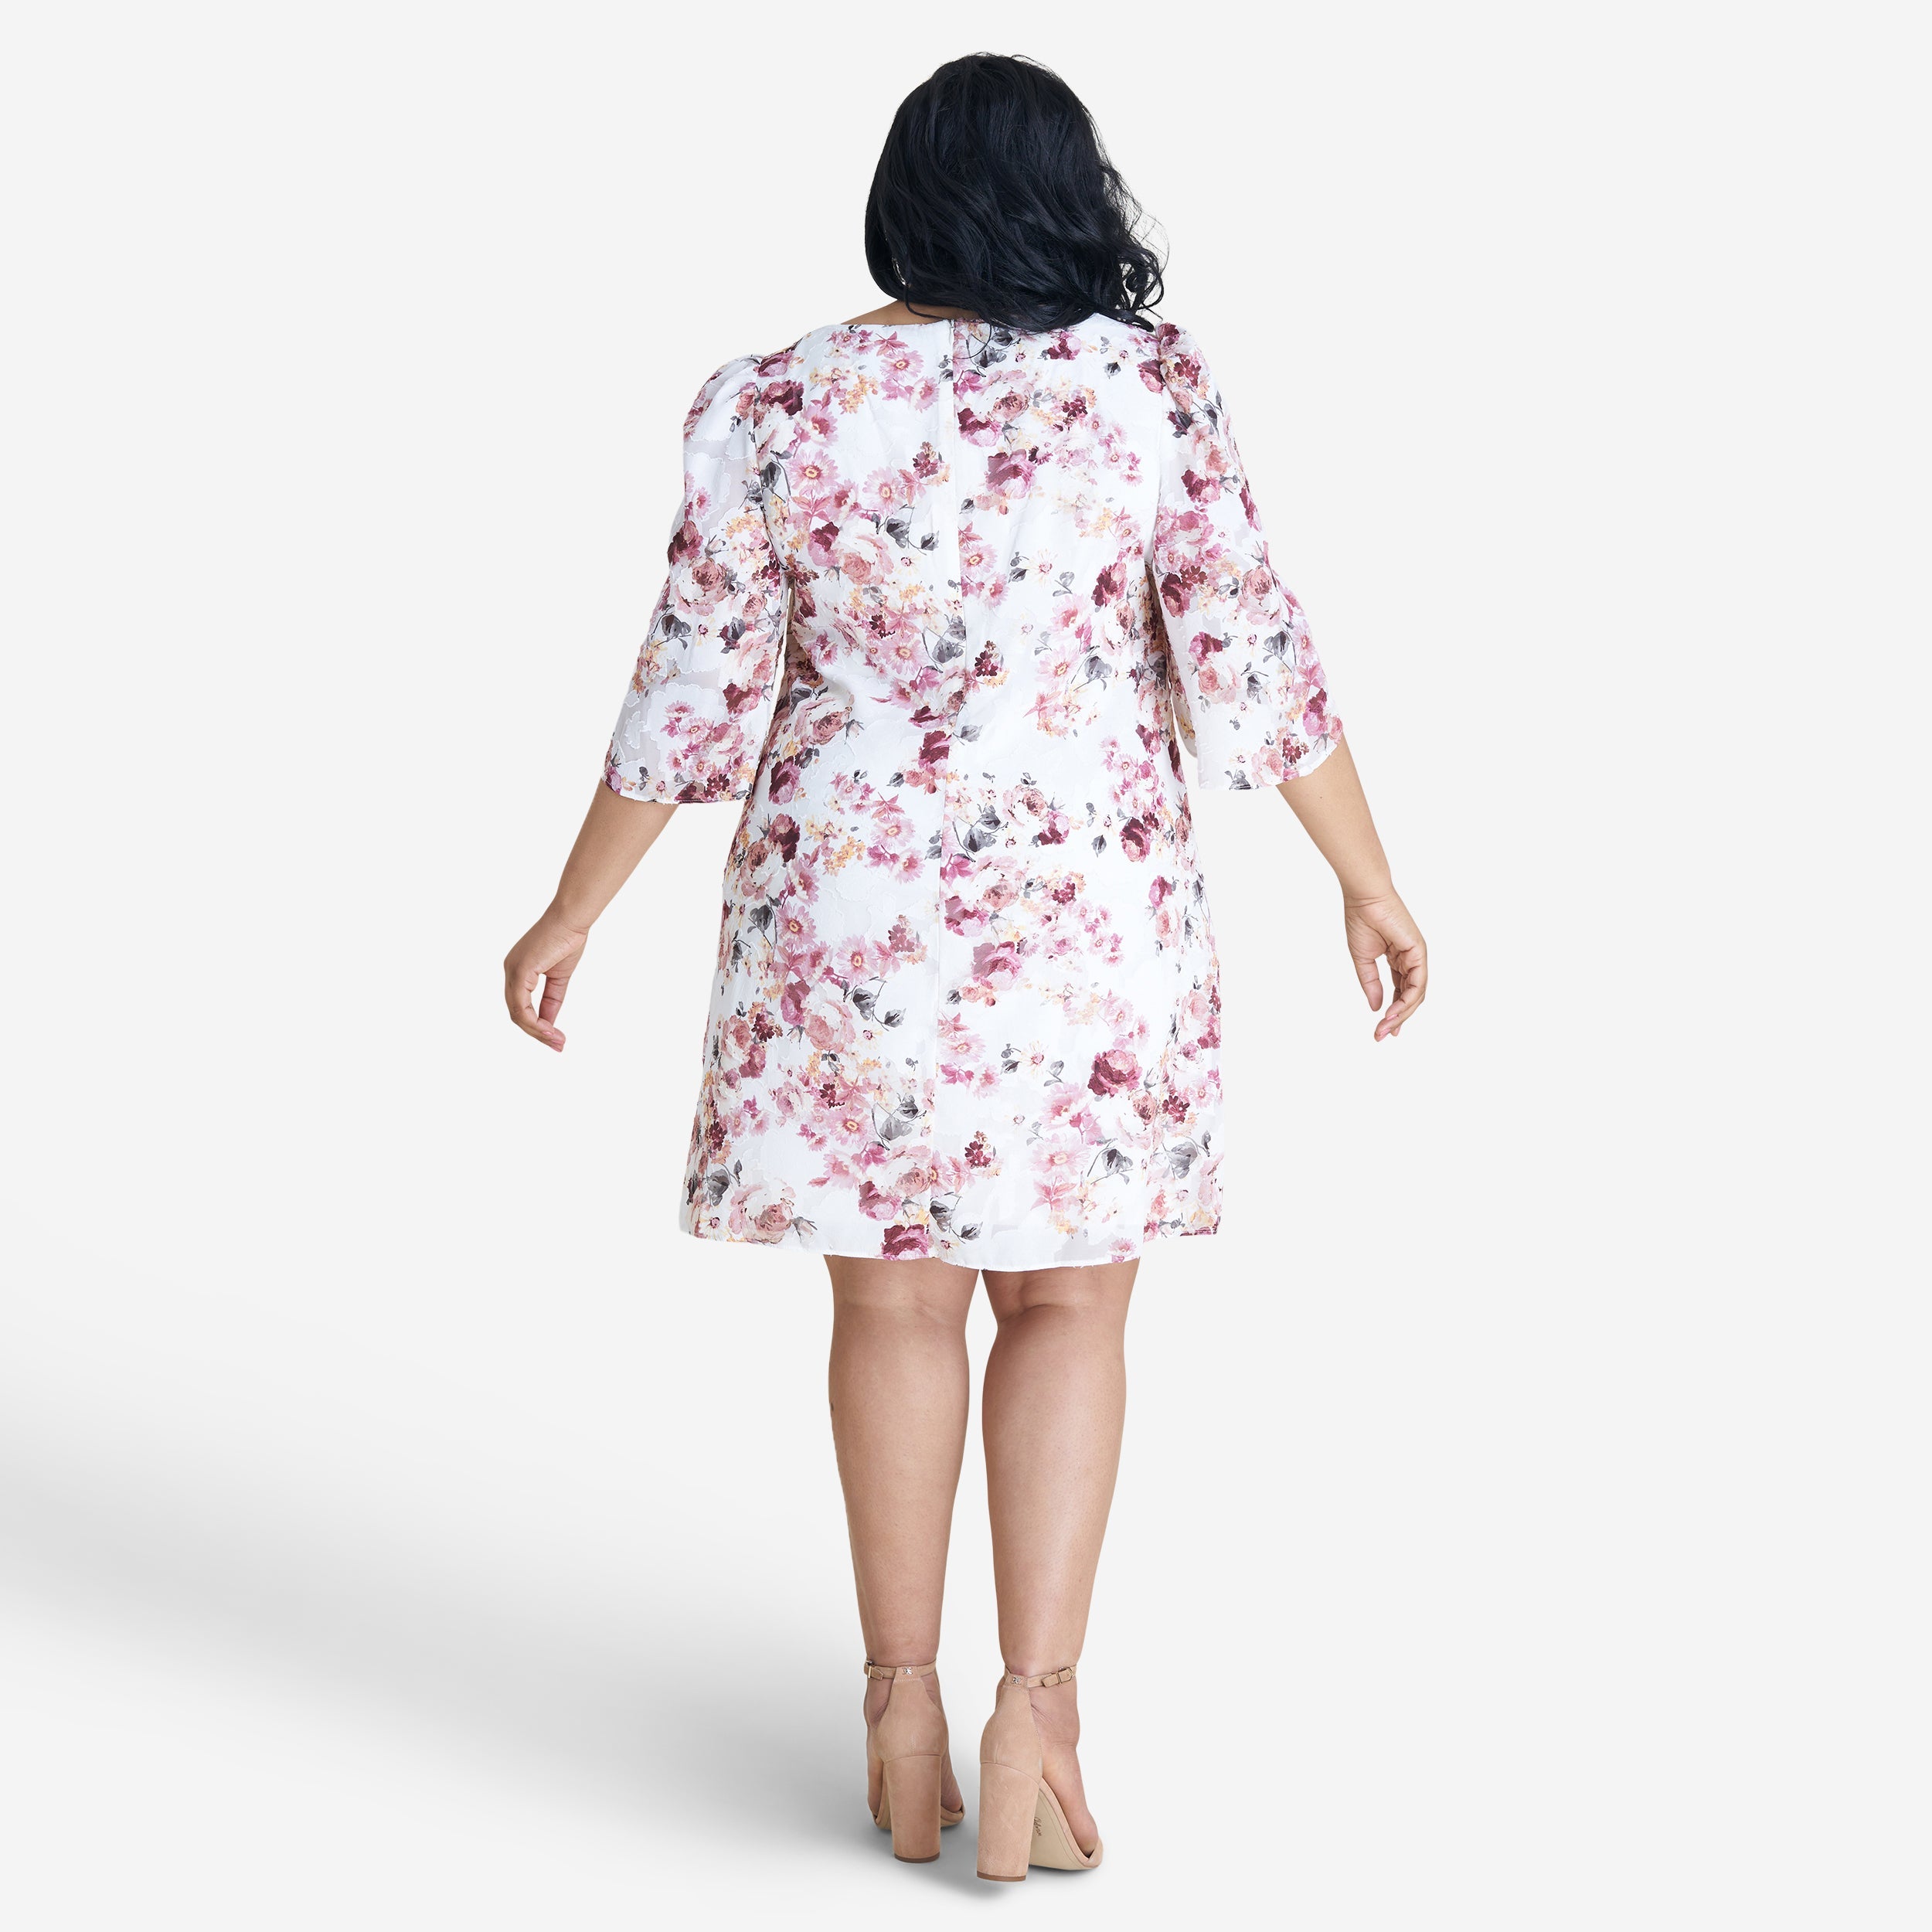 Woman posing wearing Rosewood Stevie Rosewood Floral Sheath Dress from Connected Apparel